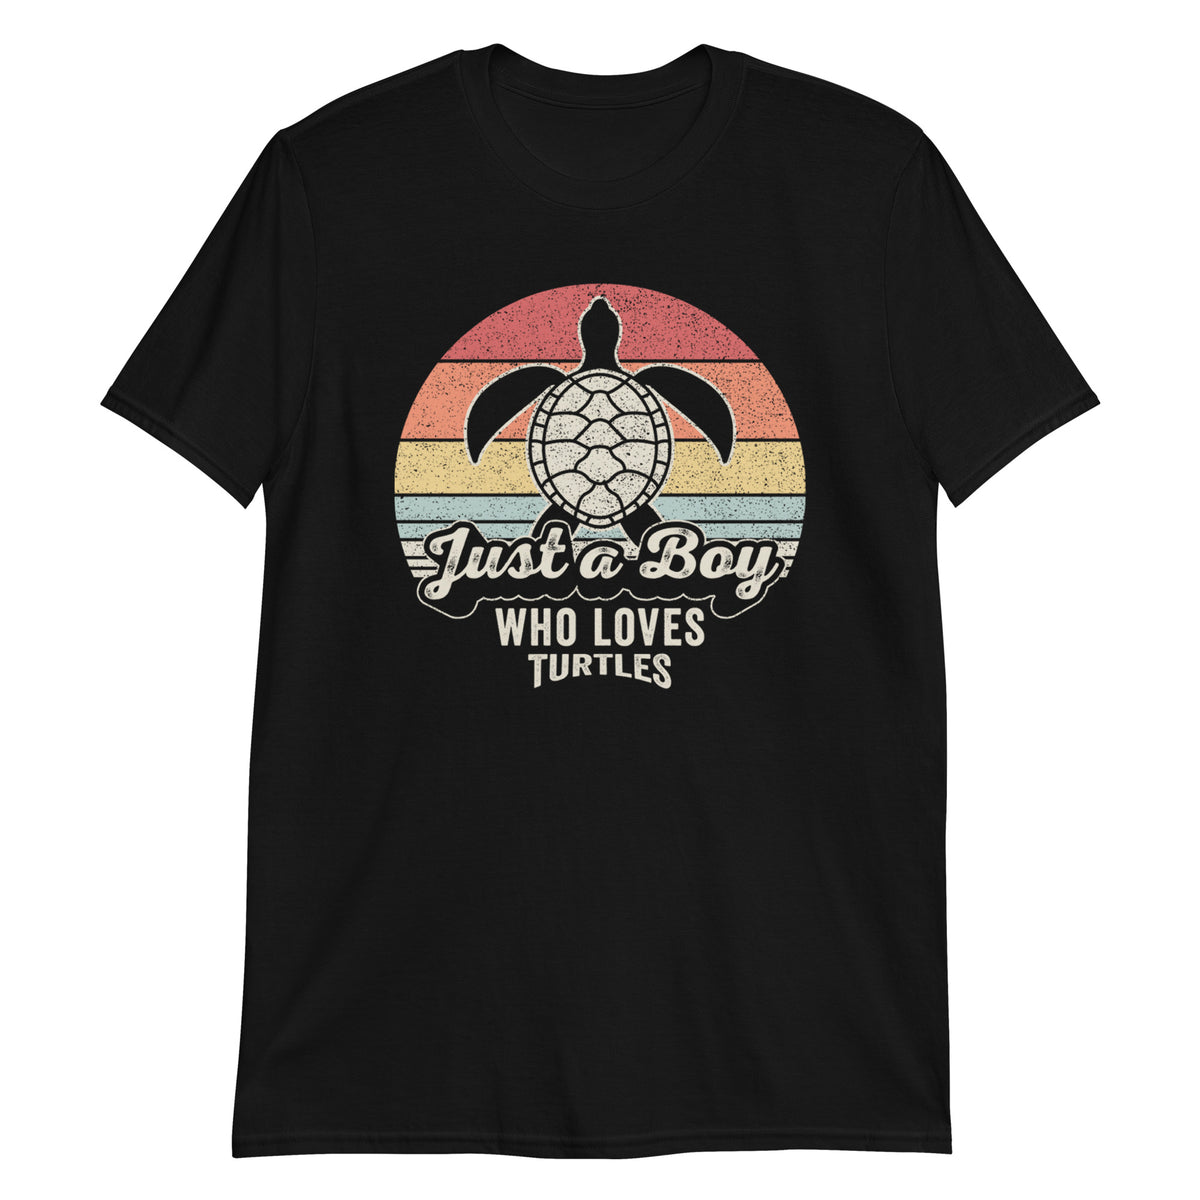 Just a Boy Who Loves Turtles T-Shirt